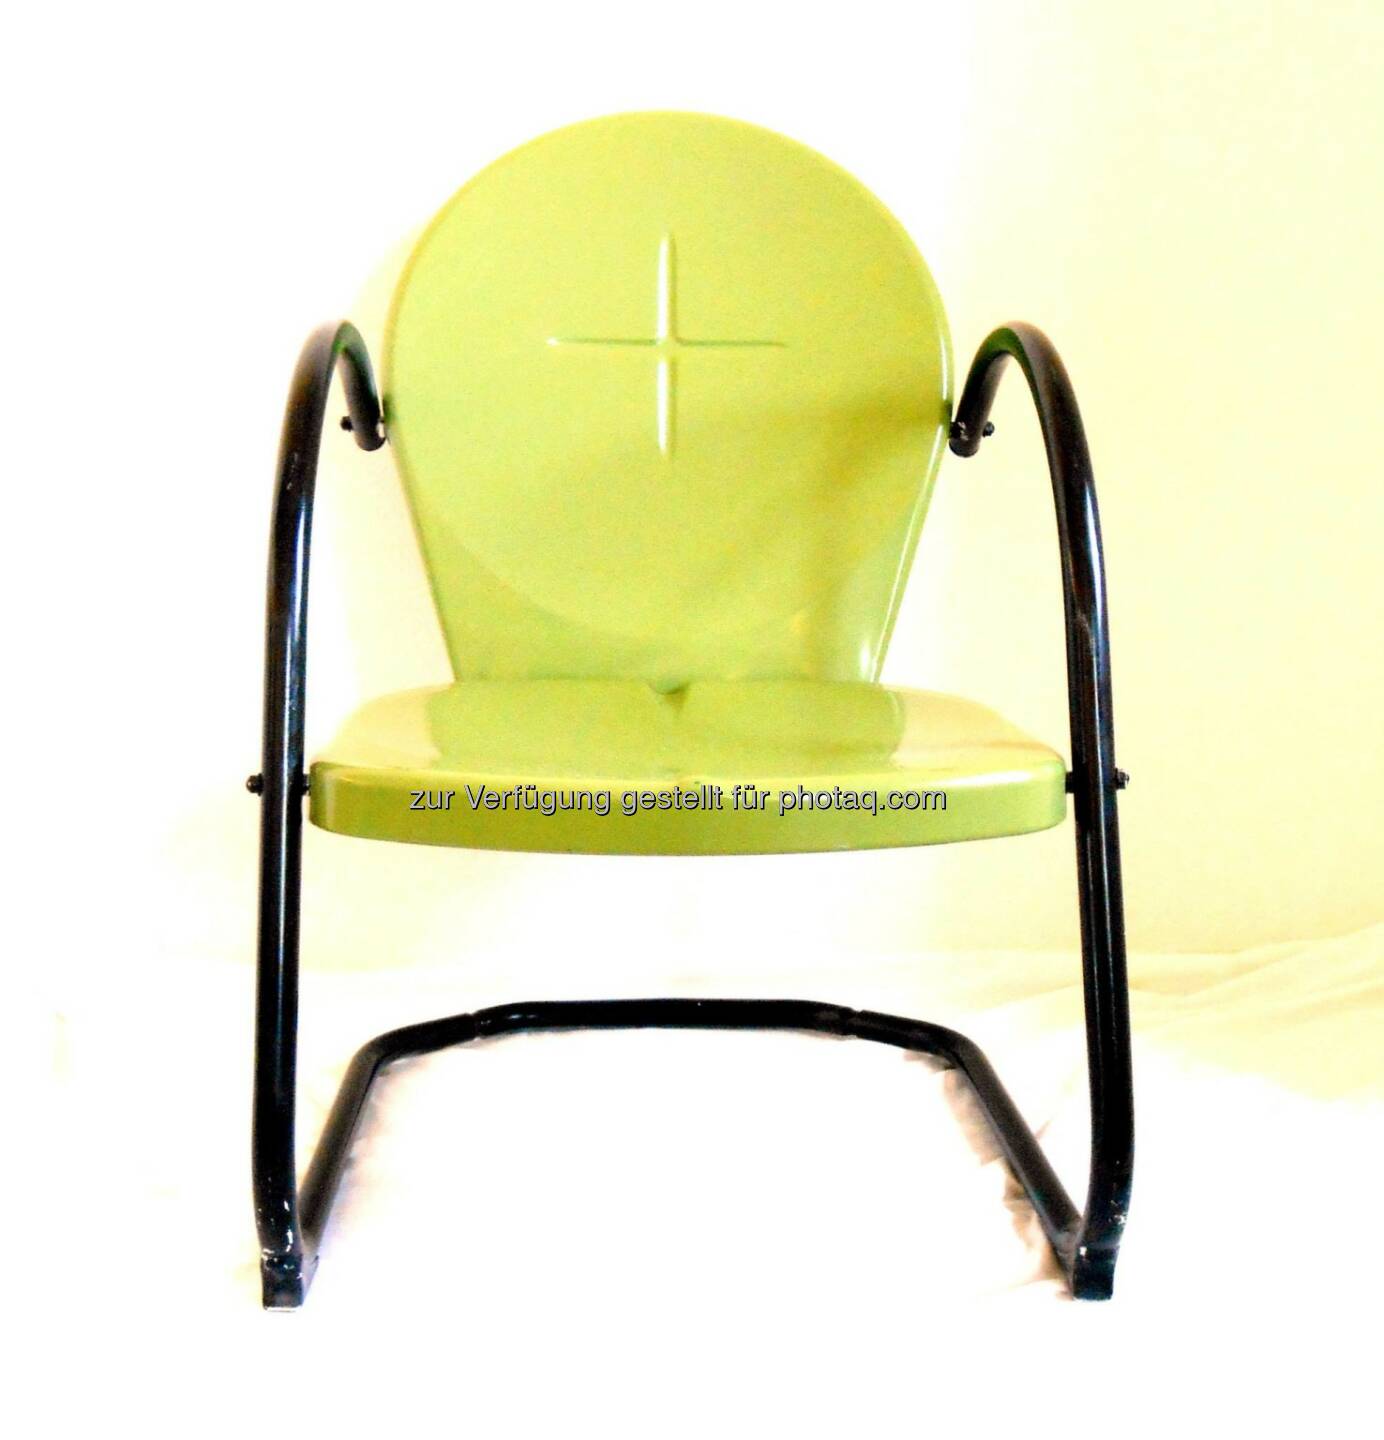 The Green Chair (2013) 